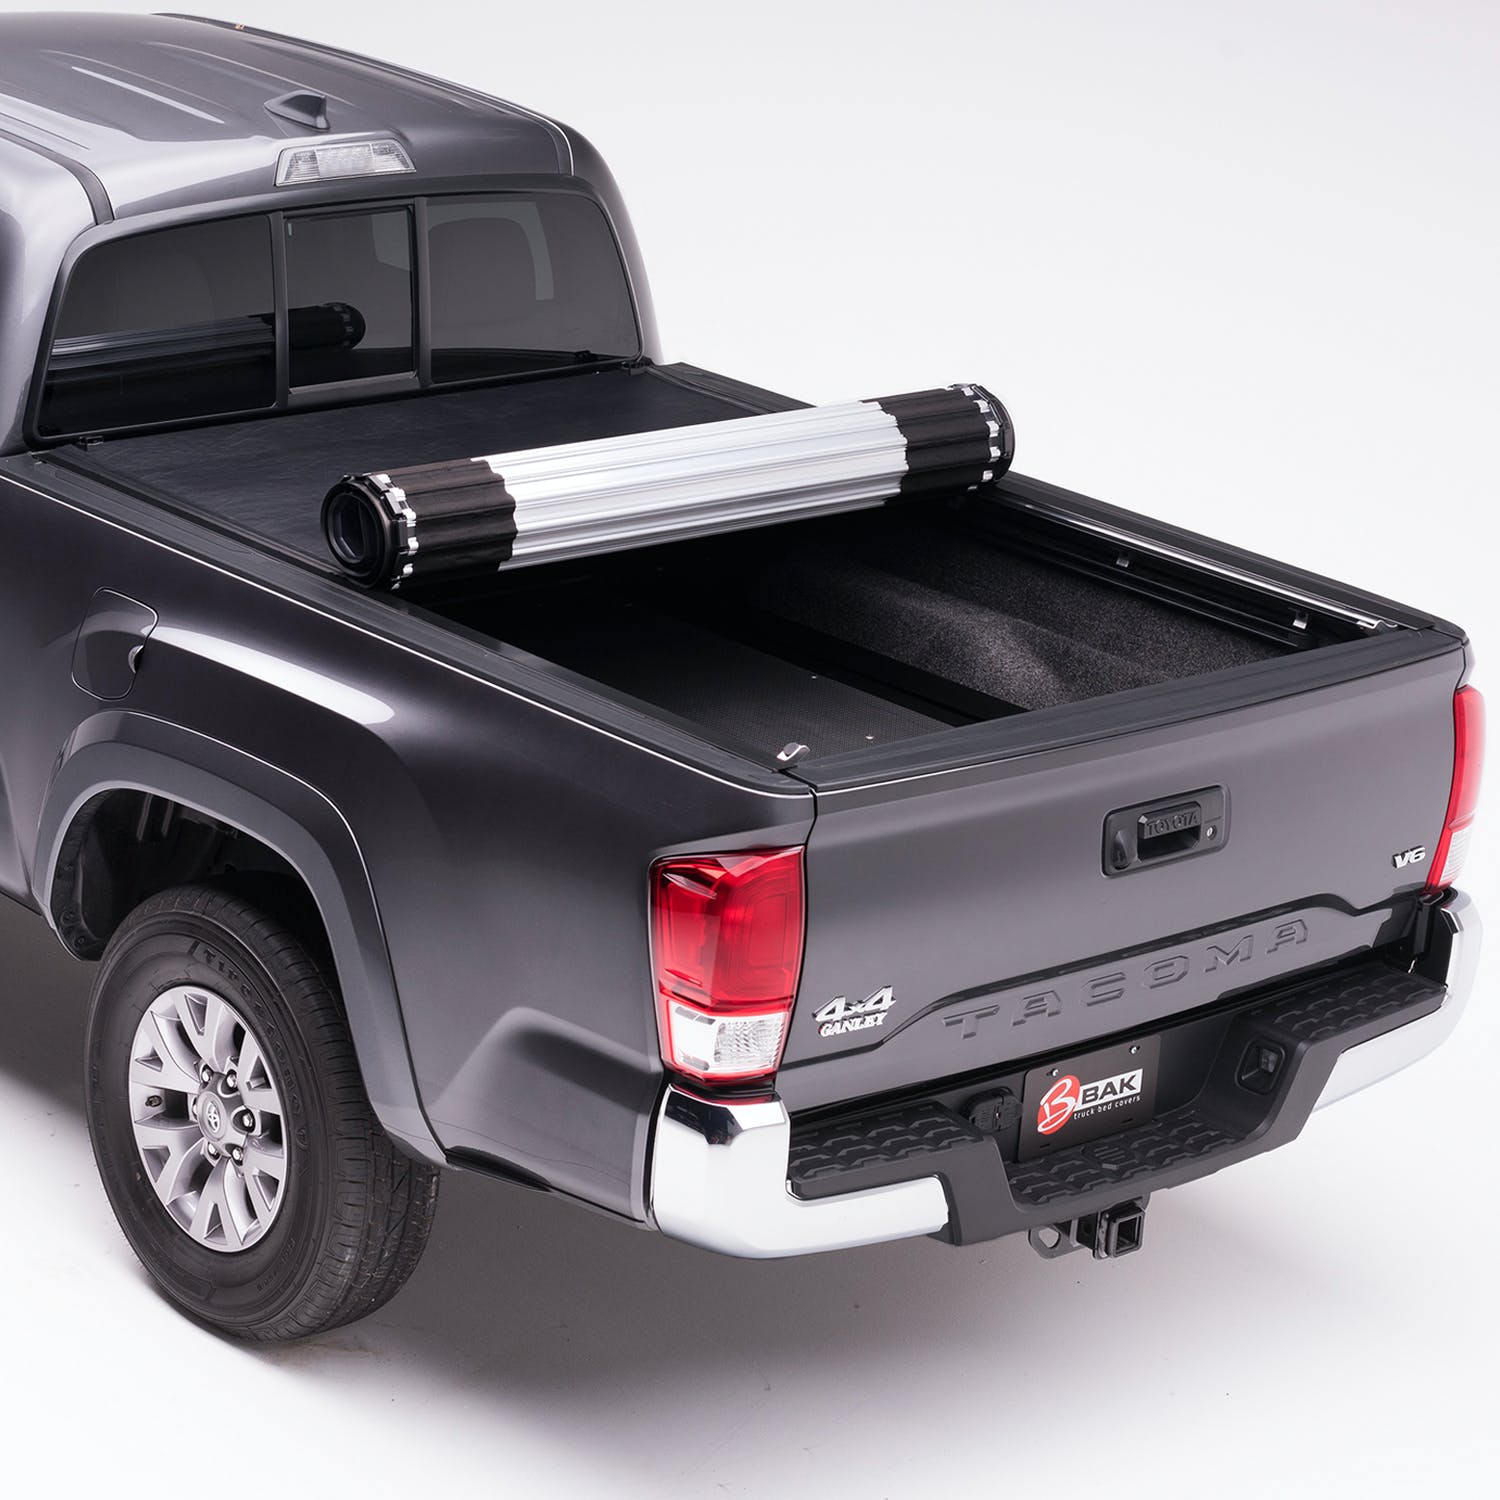 BAK Industries 39406 Revolver X2 Hard Rolling Truck Bed Cover